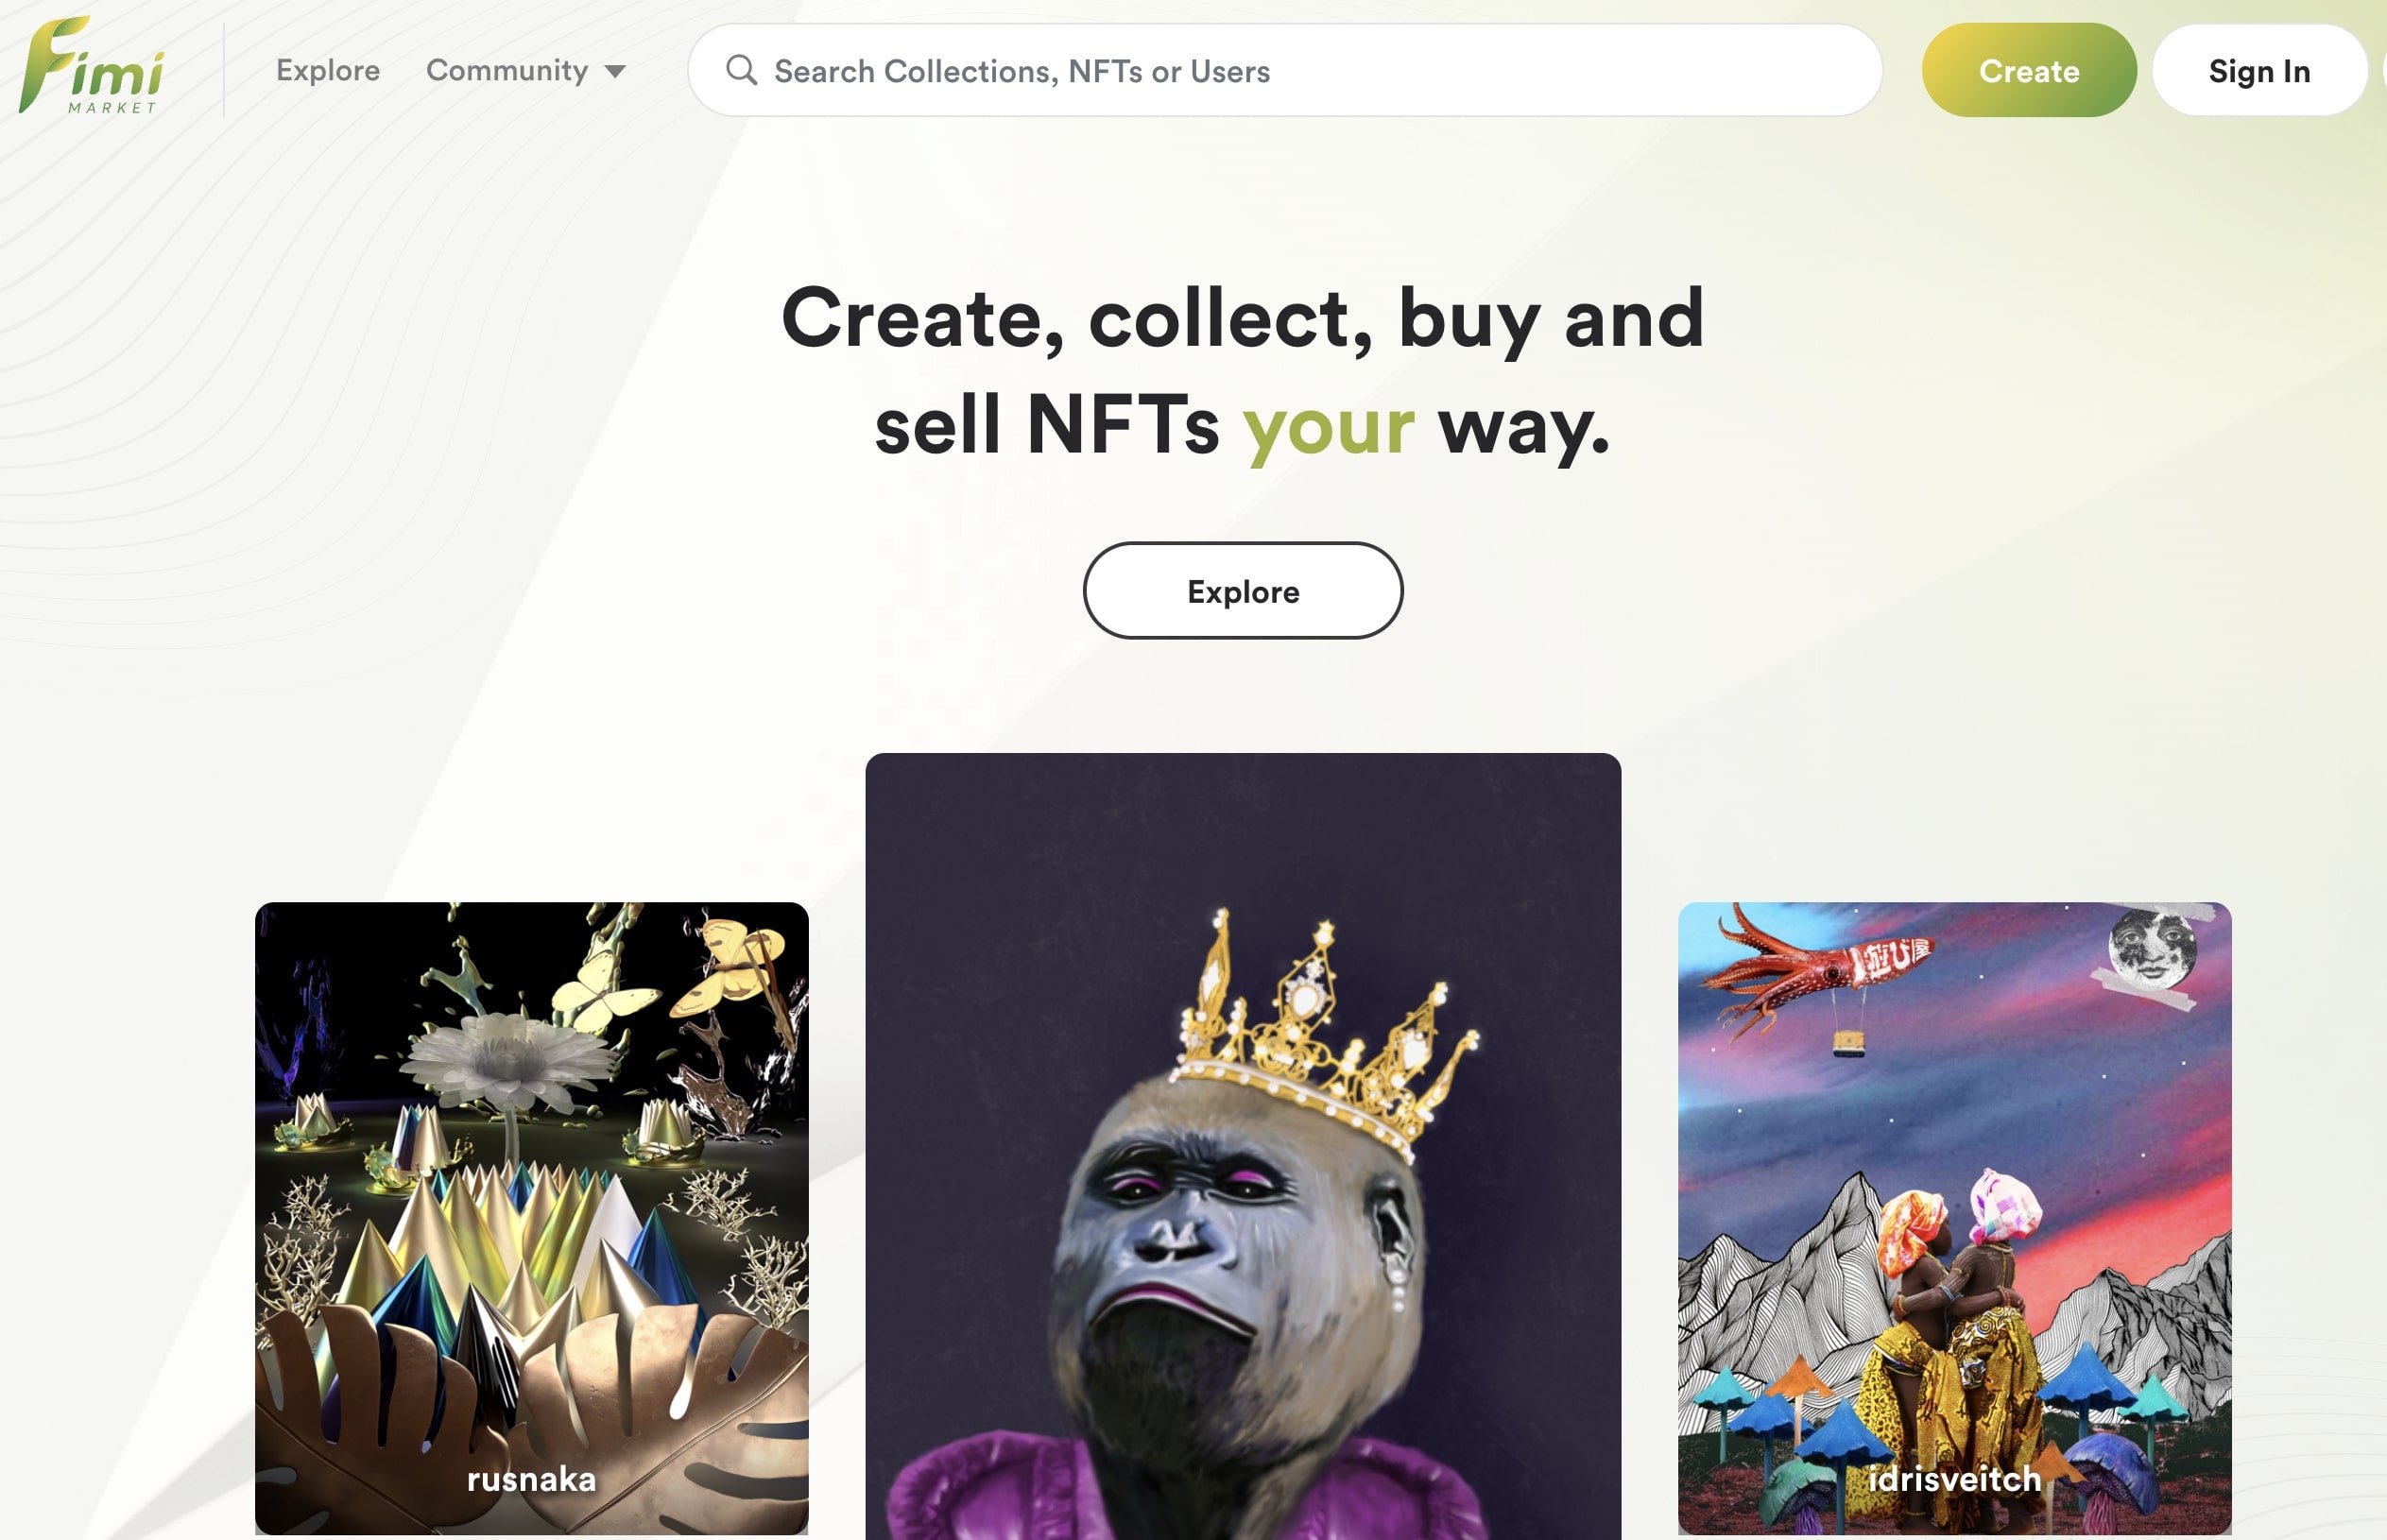 Homepage of the Fimi NFT marketplace